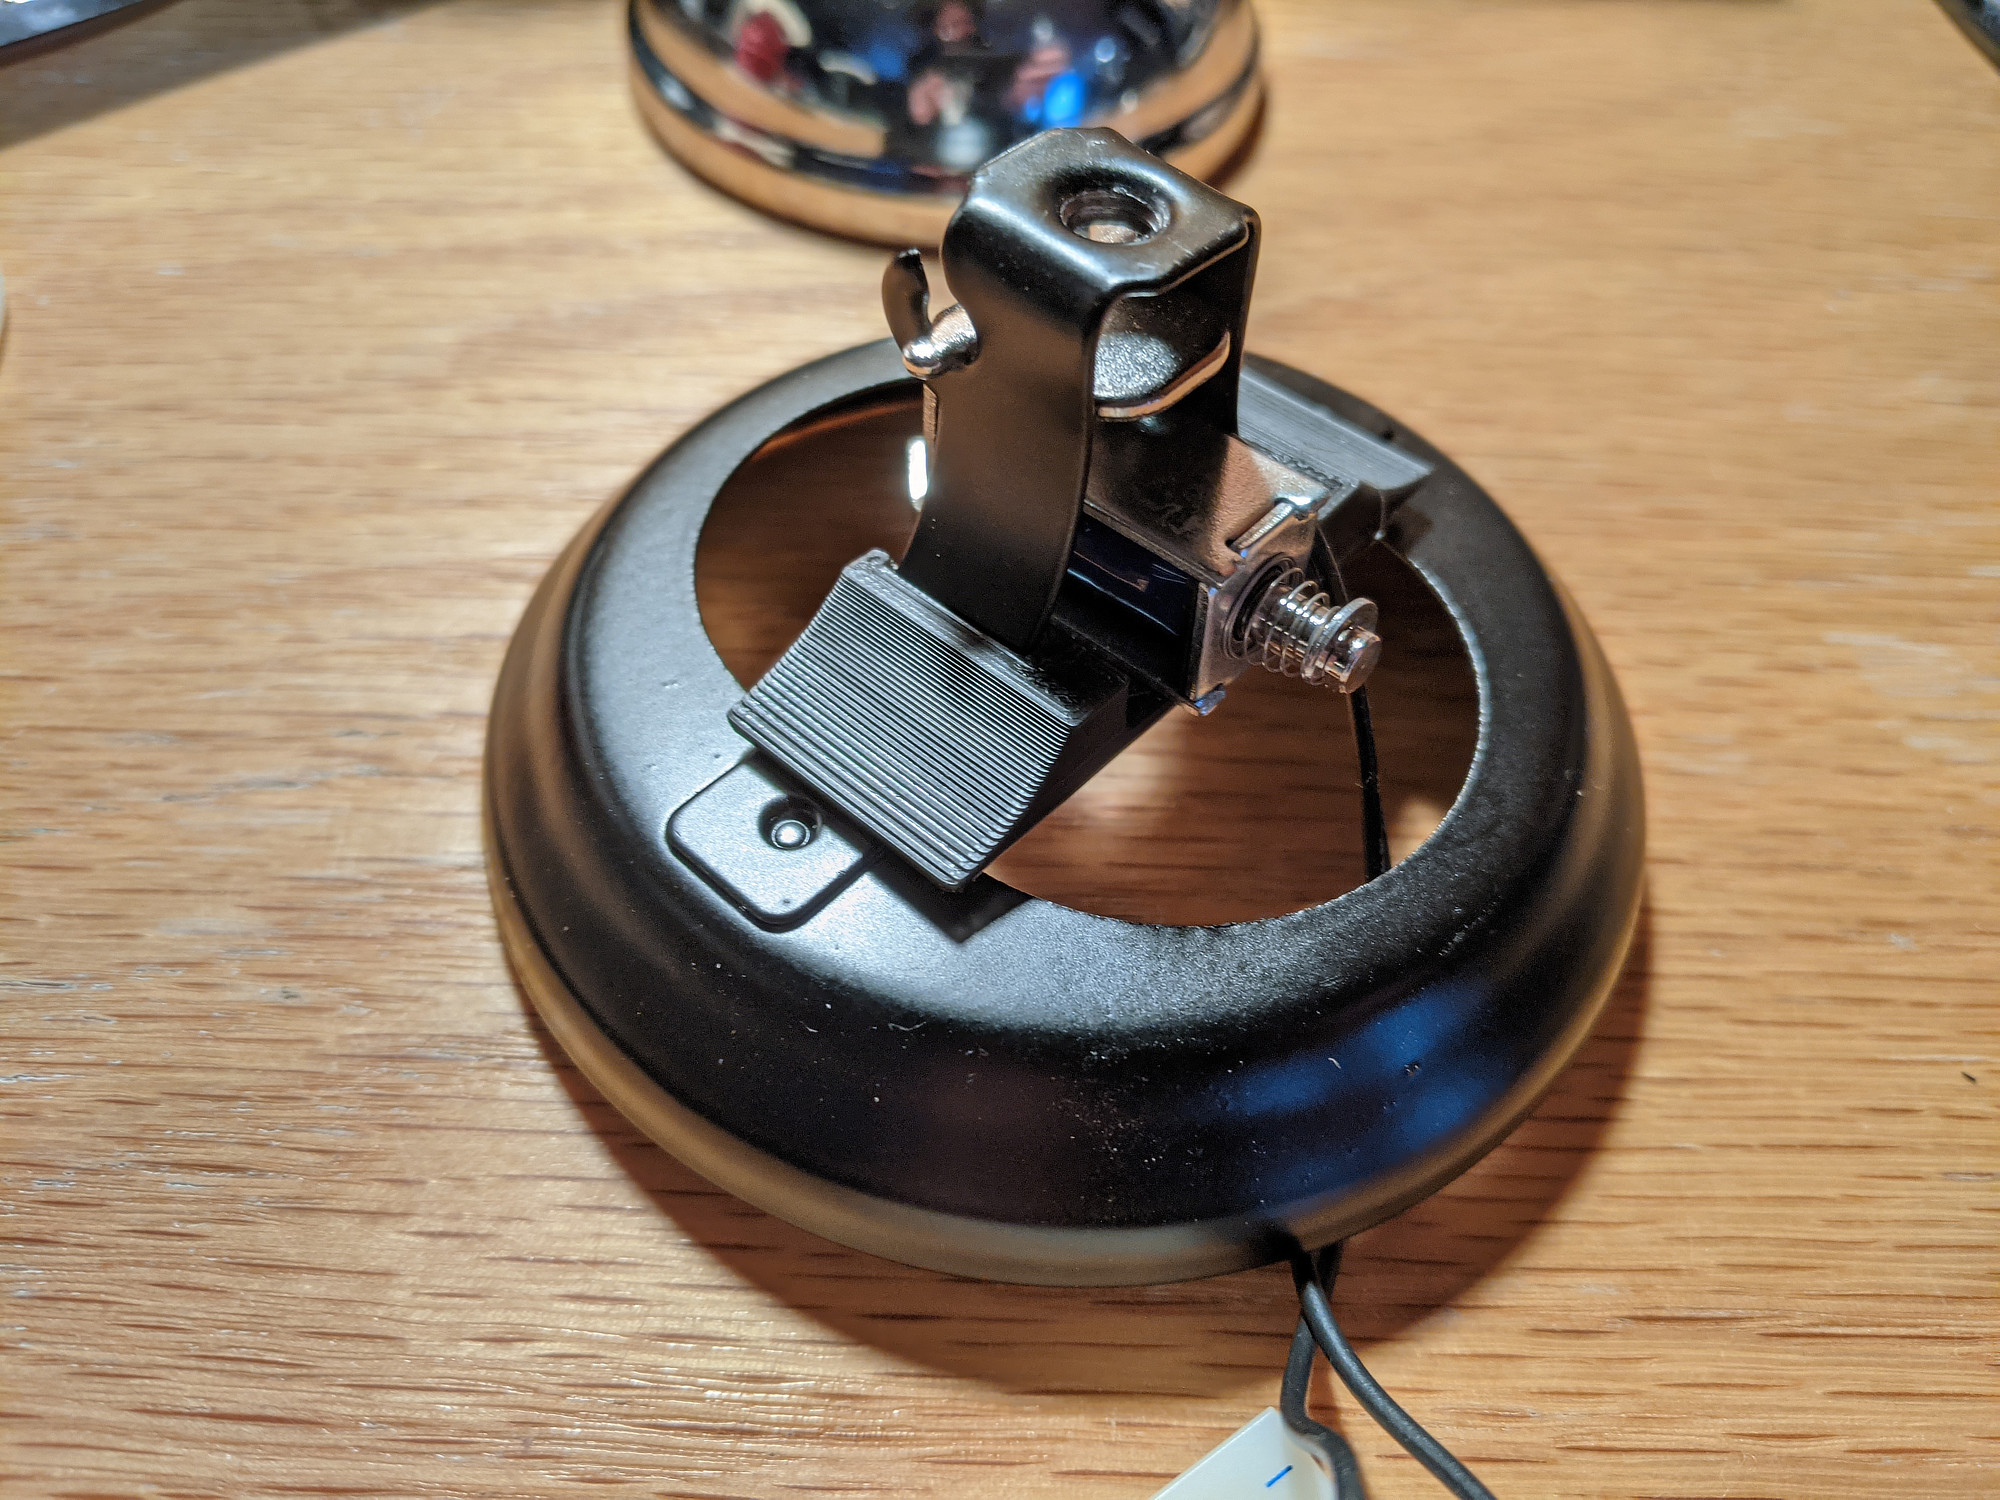 3D printed mount attached to desk bell